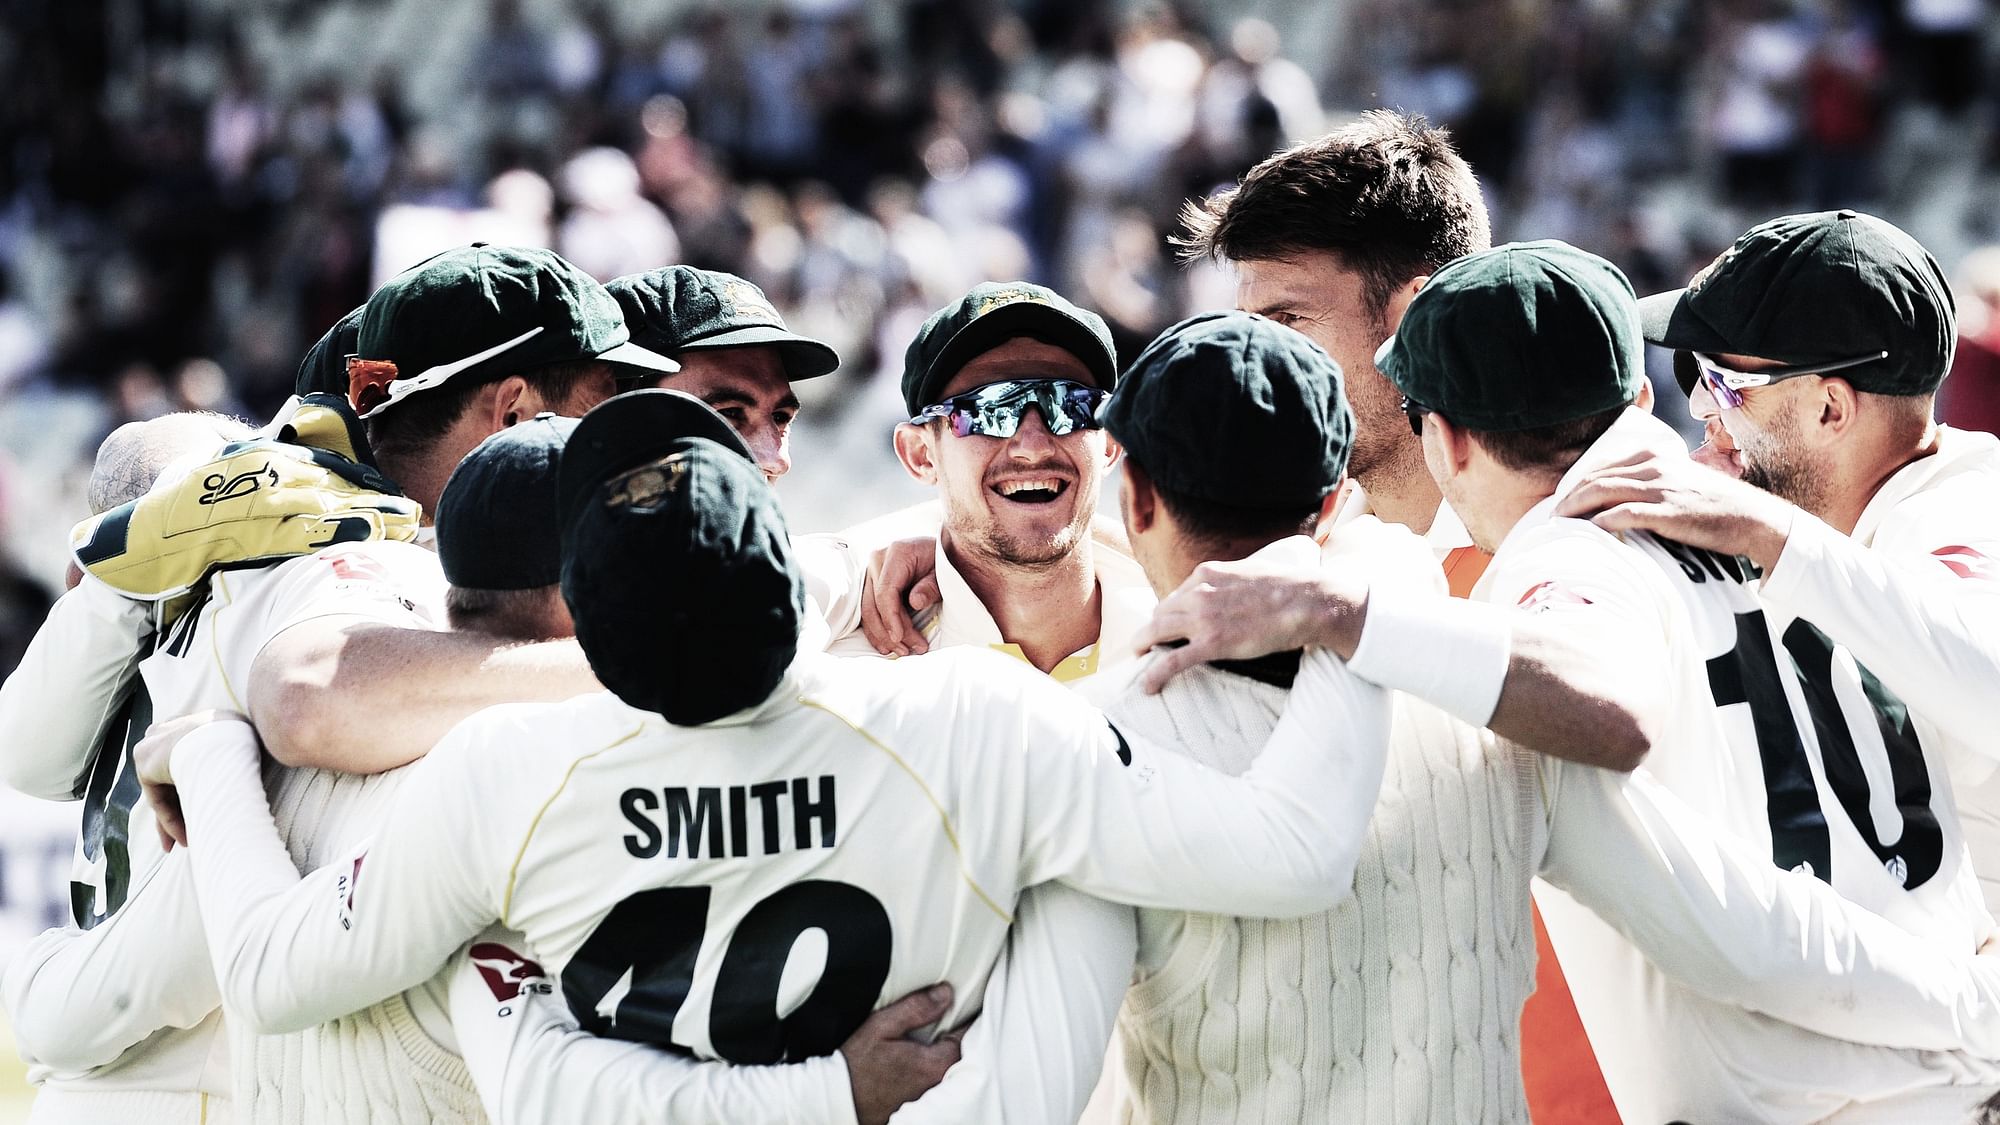 Australia beat England by 251 runs to win the first Ashes Test on Monday.